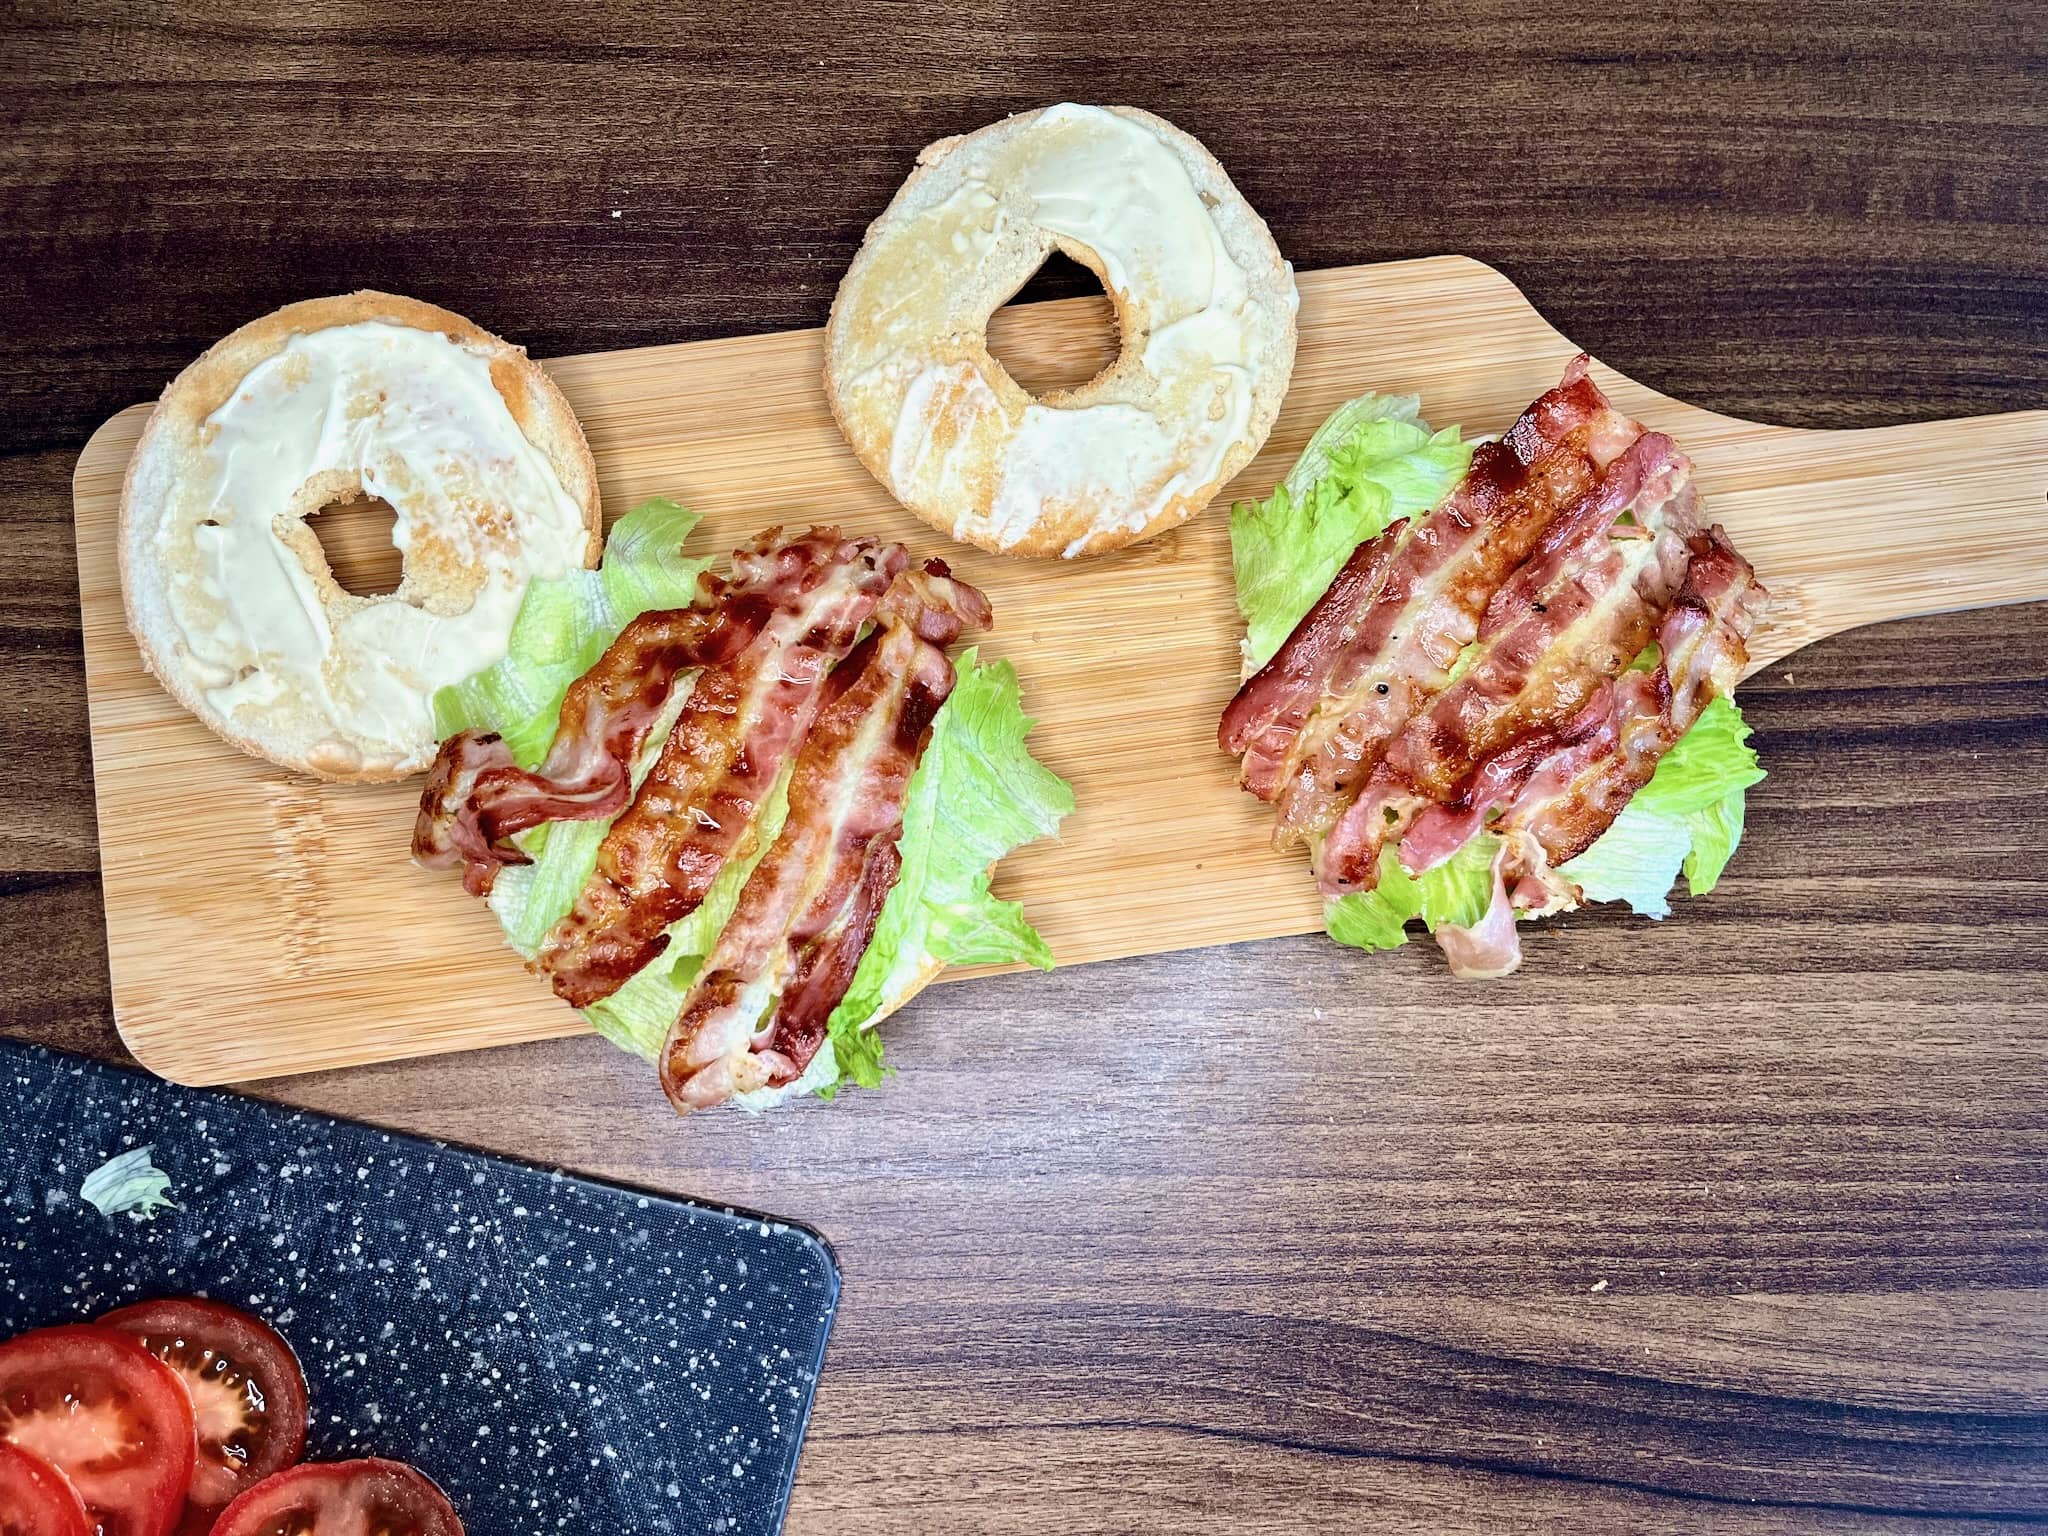 Toasted bagel halves, dressed with crisp lettuce and neatly arranged bacon slices, rest invitingly on a wooden chopping board